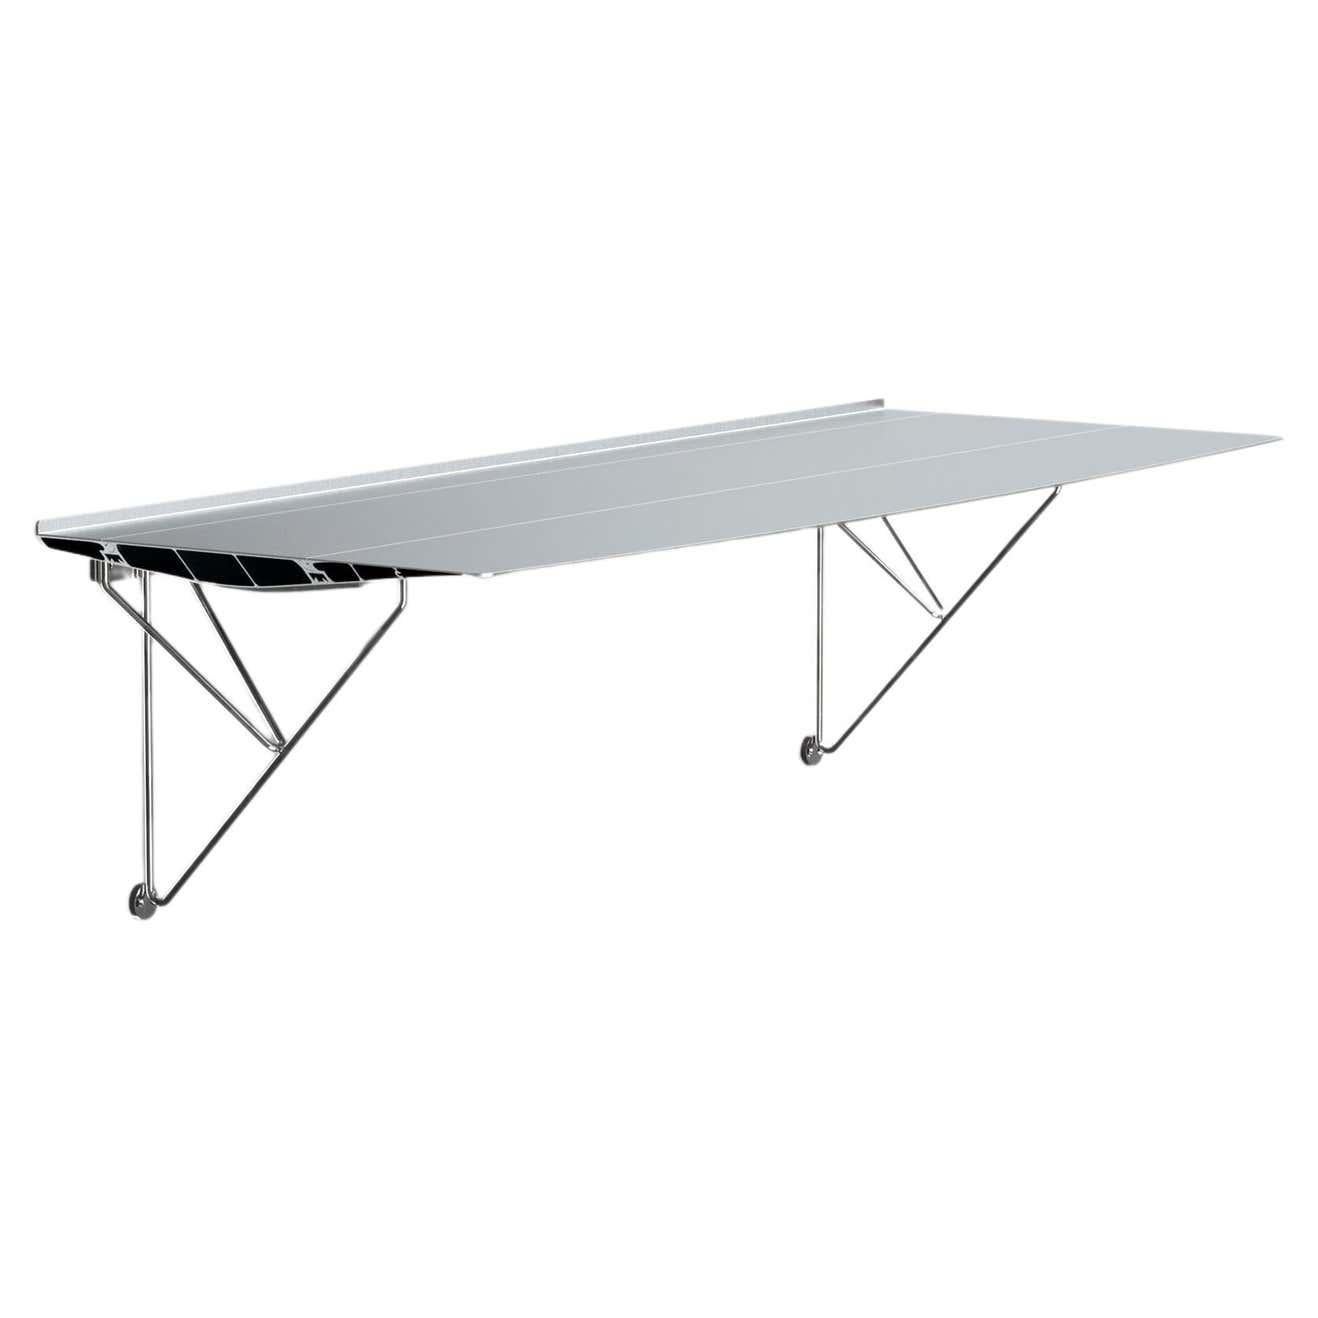 Table B Desk Wall-Mounted Aluminum Anodized Silver Top Stainless Steel Rod Legs